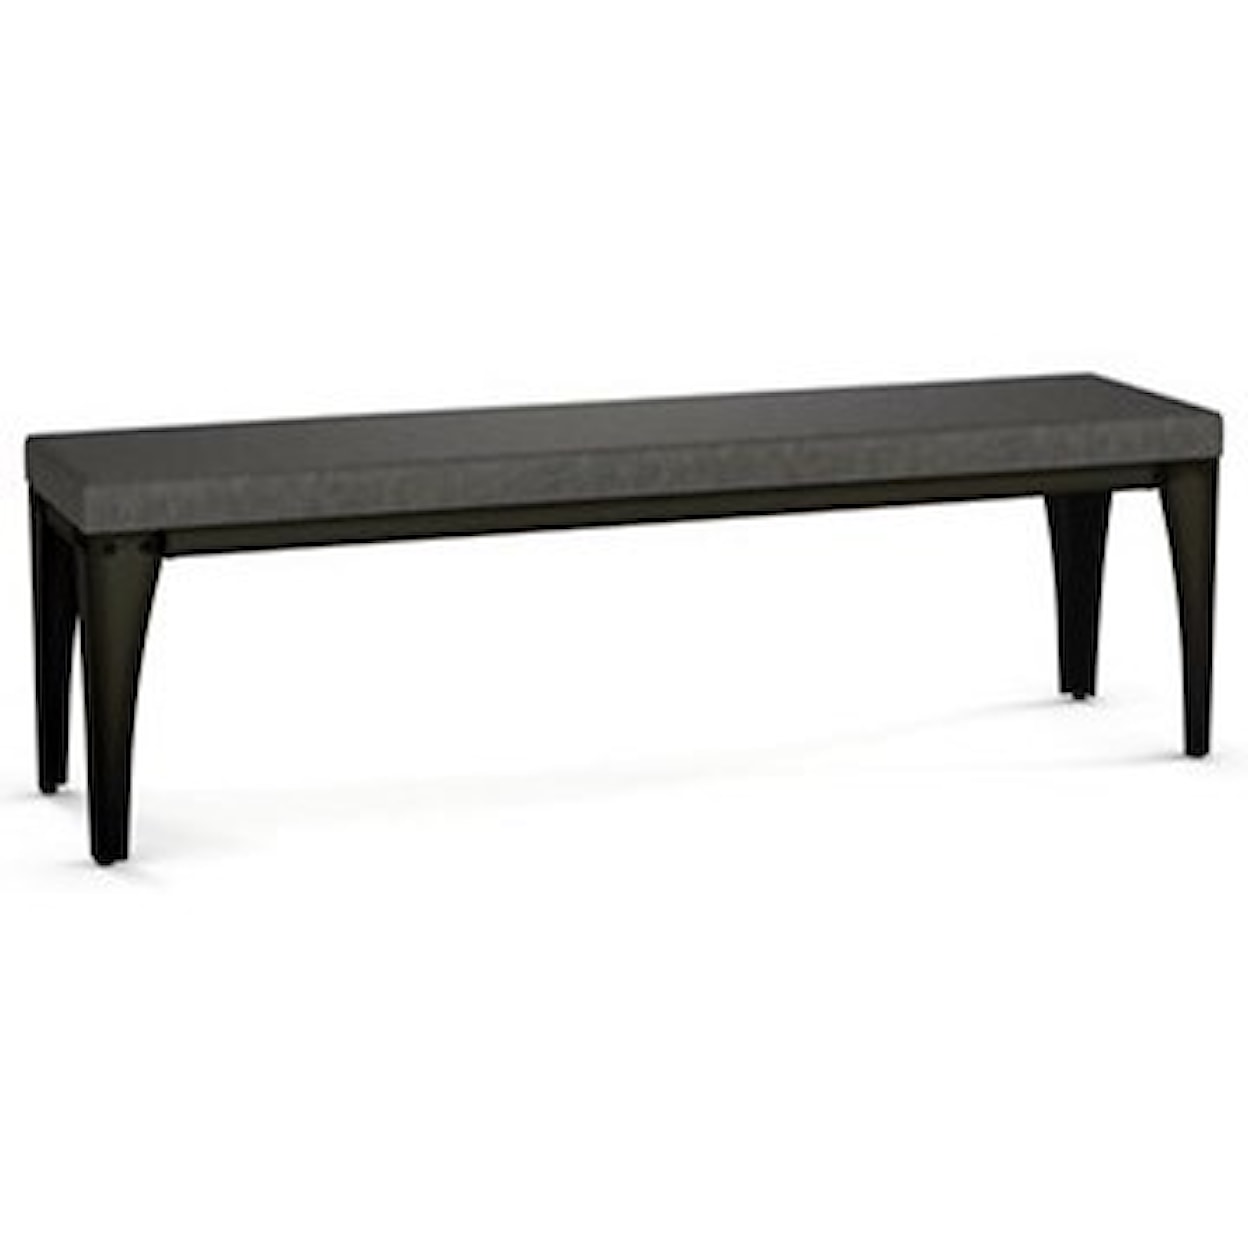 Amisco Industrial Upright Dining Bench